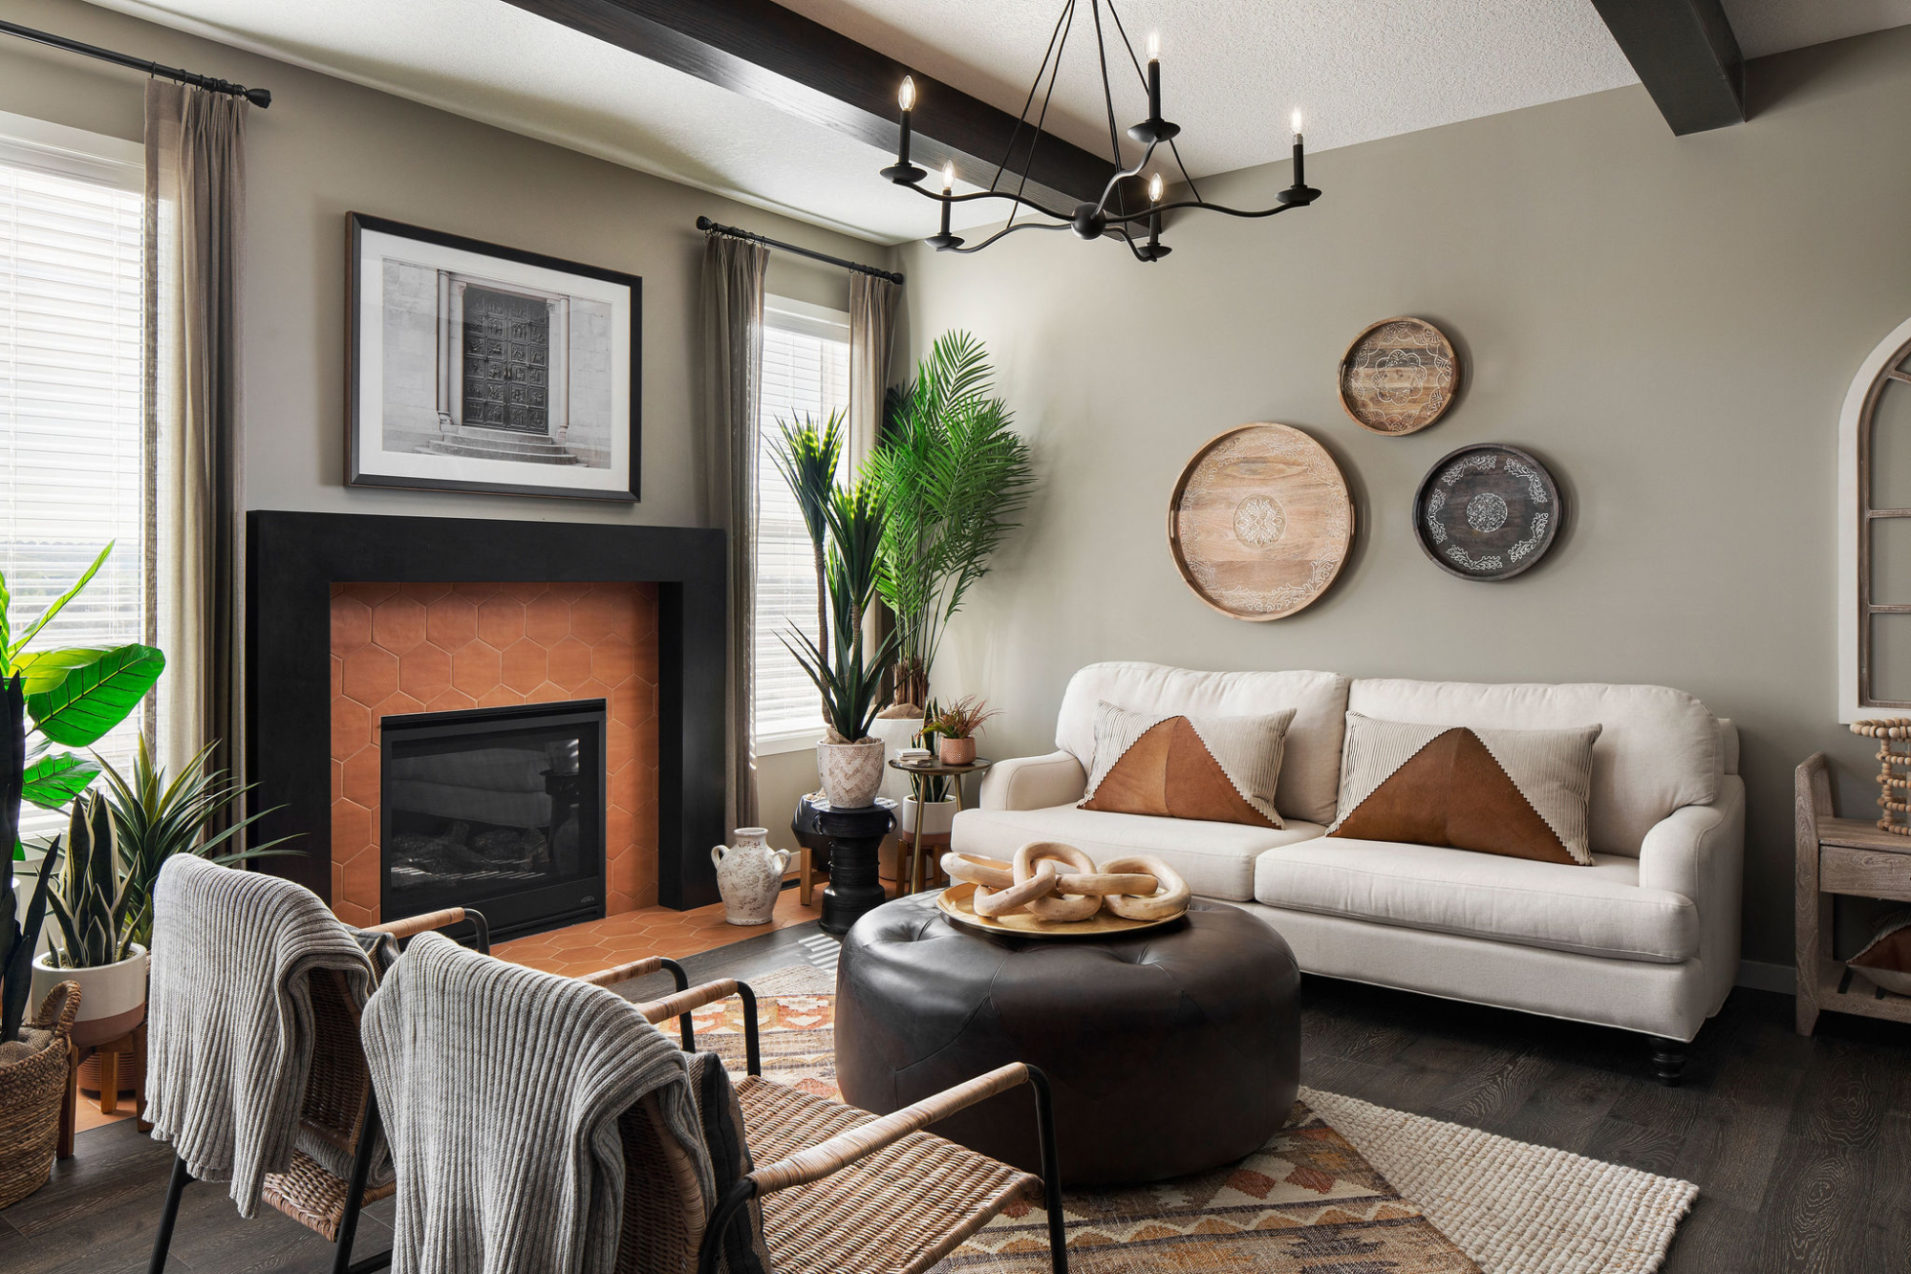 A living room with fireplace, white couch, and wooden ceiling beams.